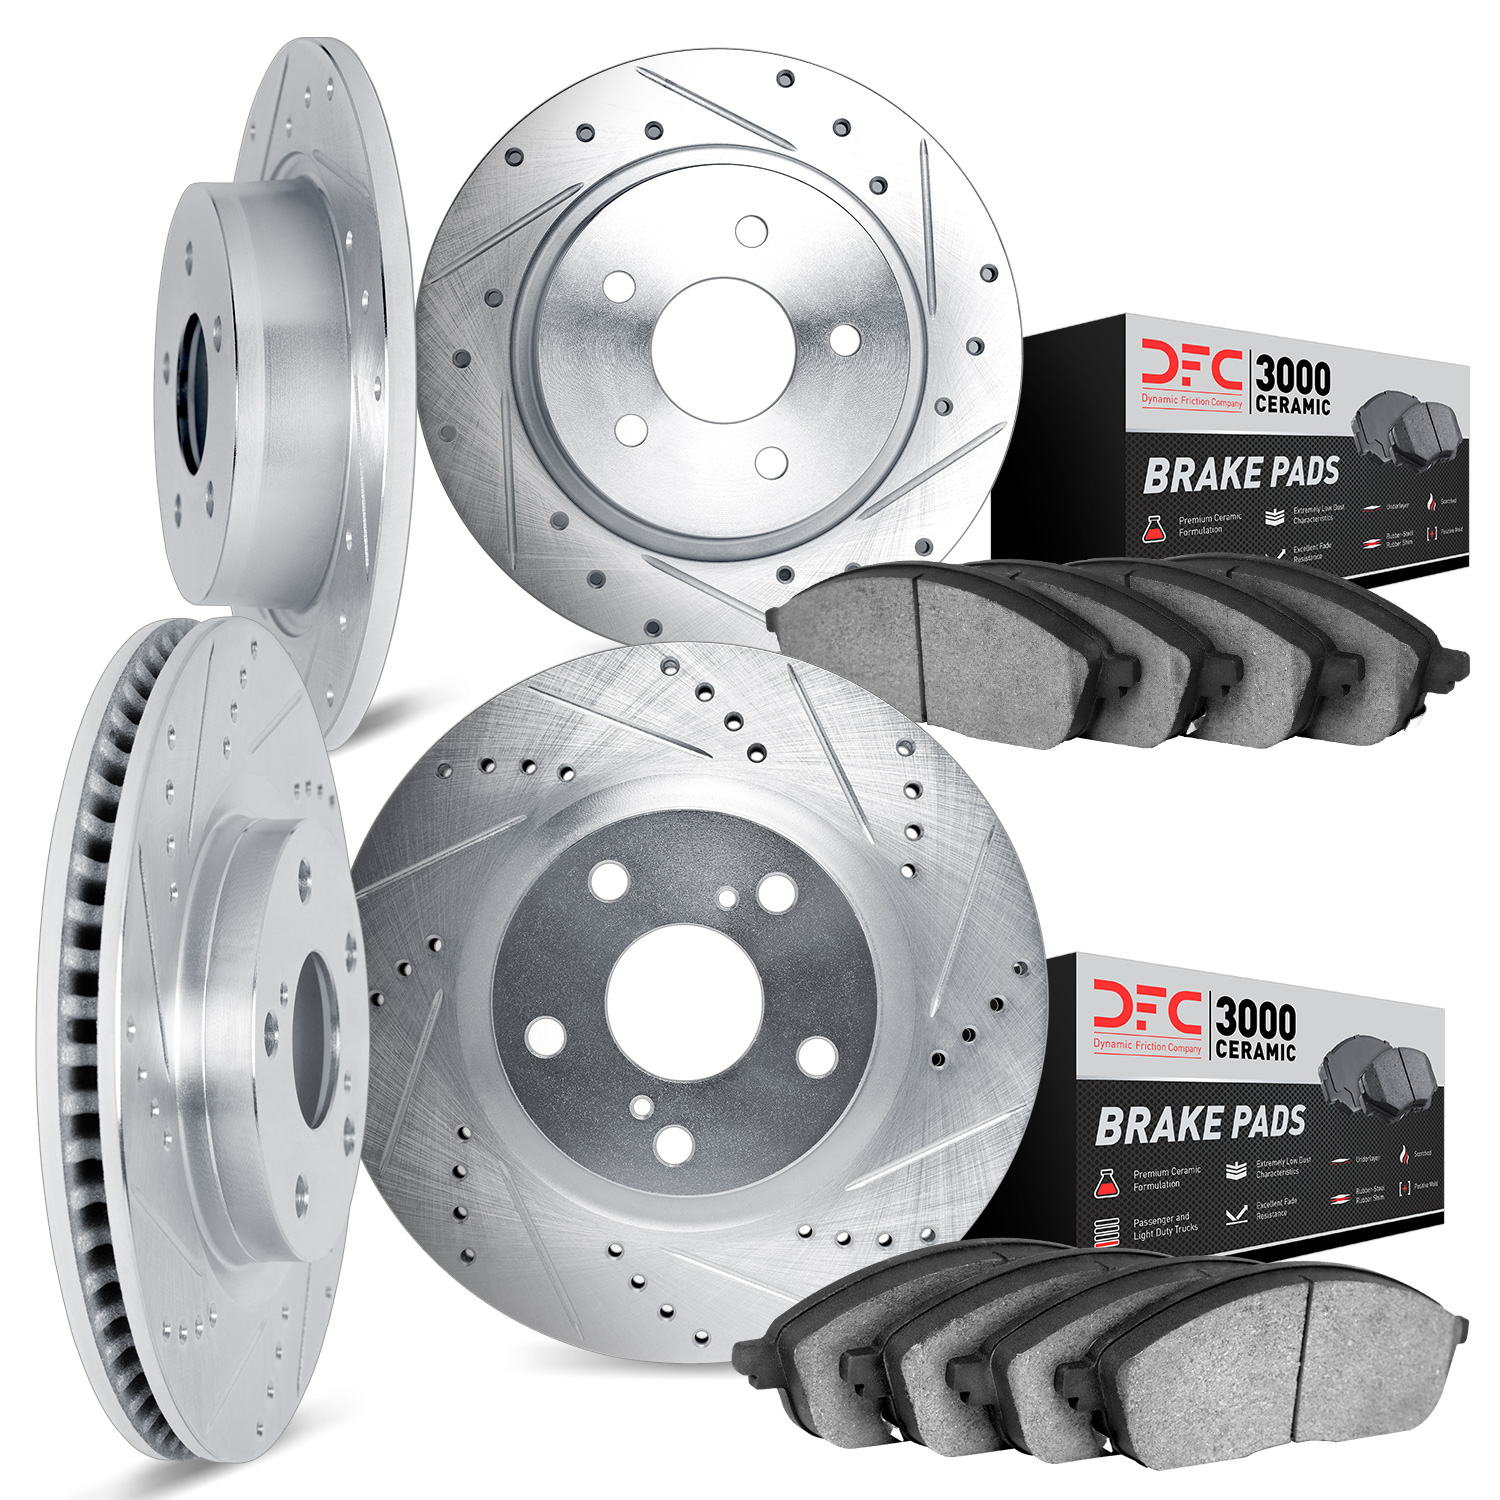 7304-80029 Drilled/Slotted Brake Rotor with 3000-Series Ceramic Brake Pads Kit [Silver], 2006-2015 Ford/Lincoln/Mercury/Mazda, P